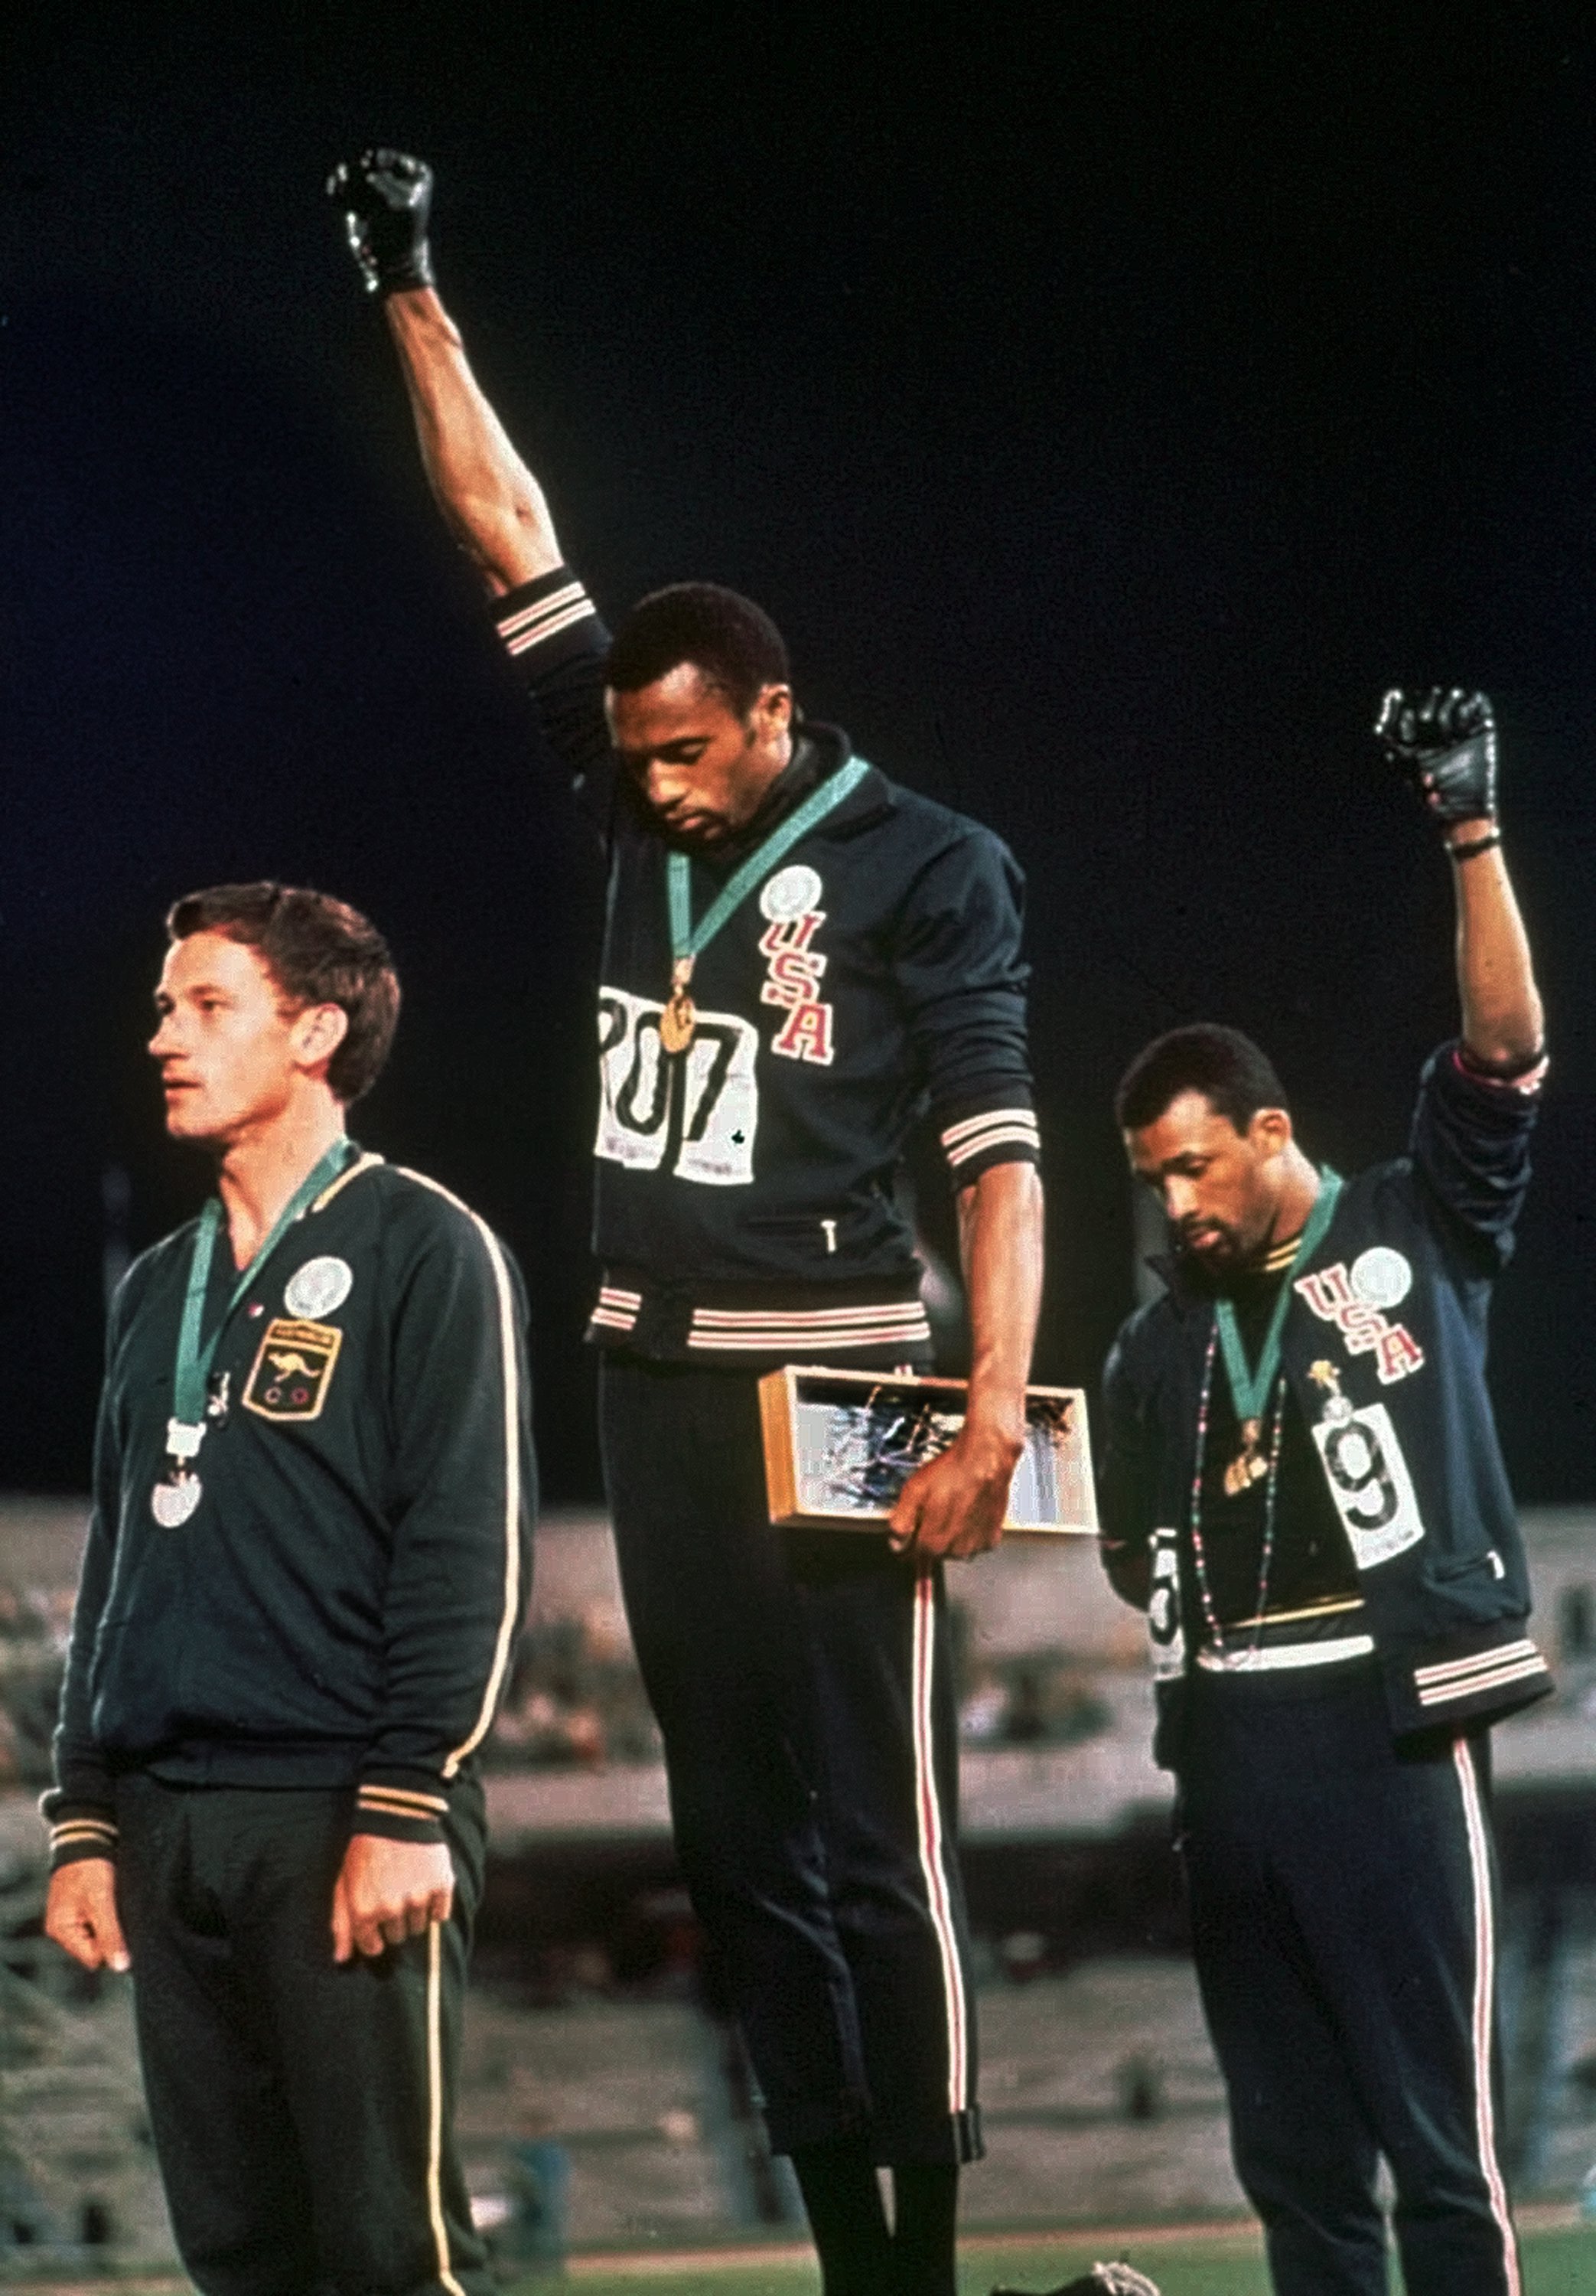 Medalists Smith (C) and Carlos (R) on the Olympic podium at the 1968 Summer Olympics in Mexico City [AP Photo]